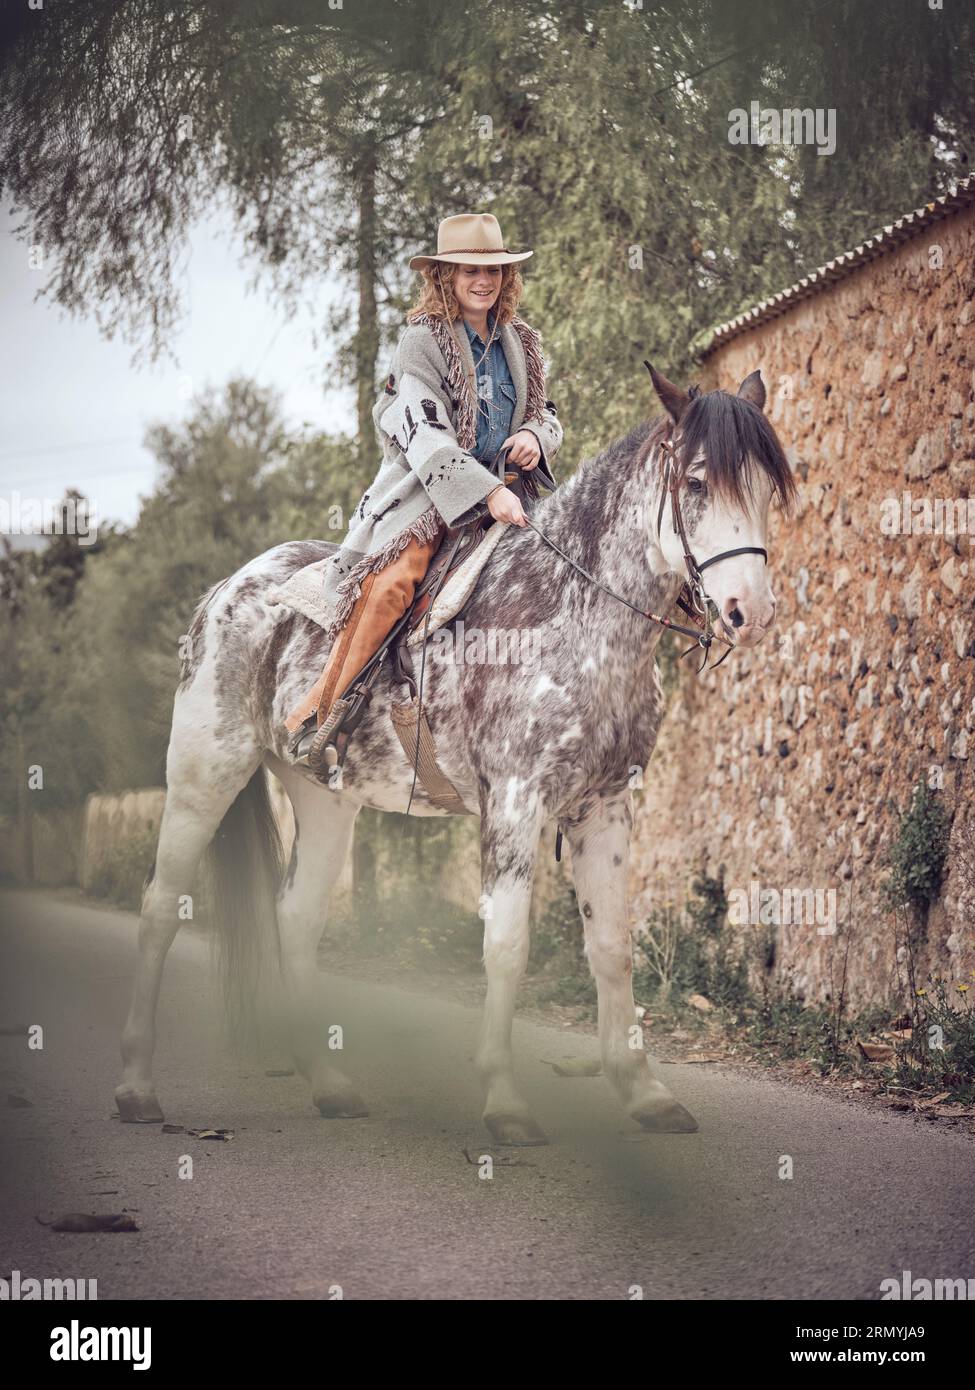 Smiling woman cowboy sitting on gray spotted horse and holding reins in hand while standing near fence Stock Photo